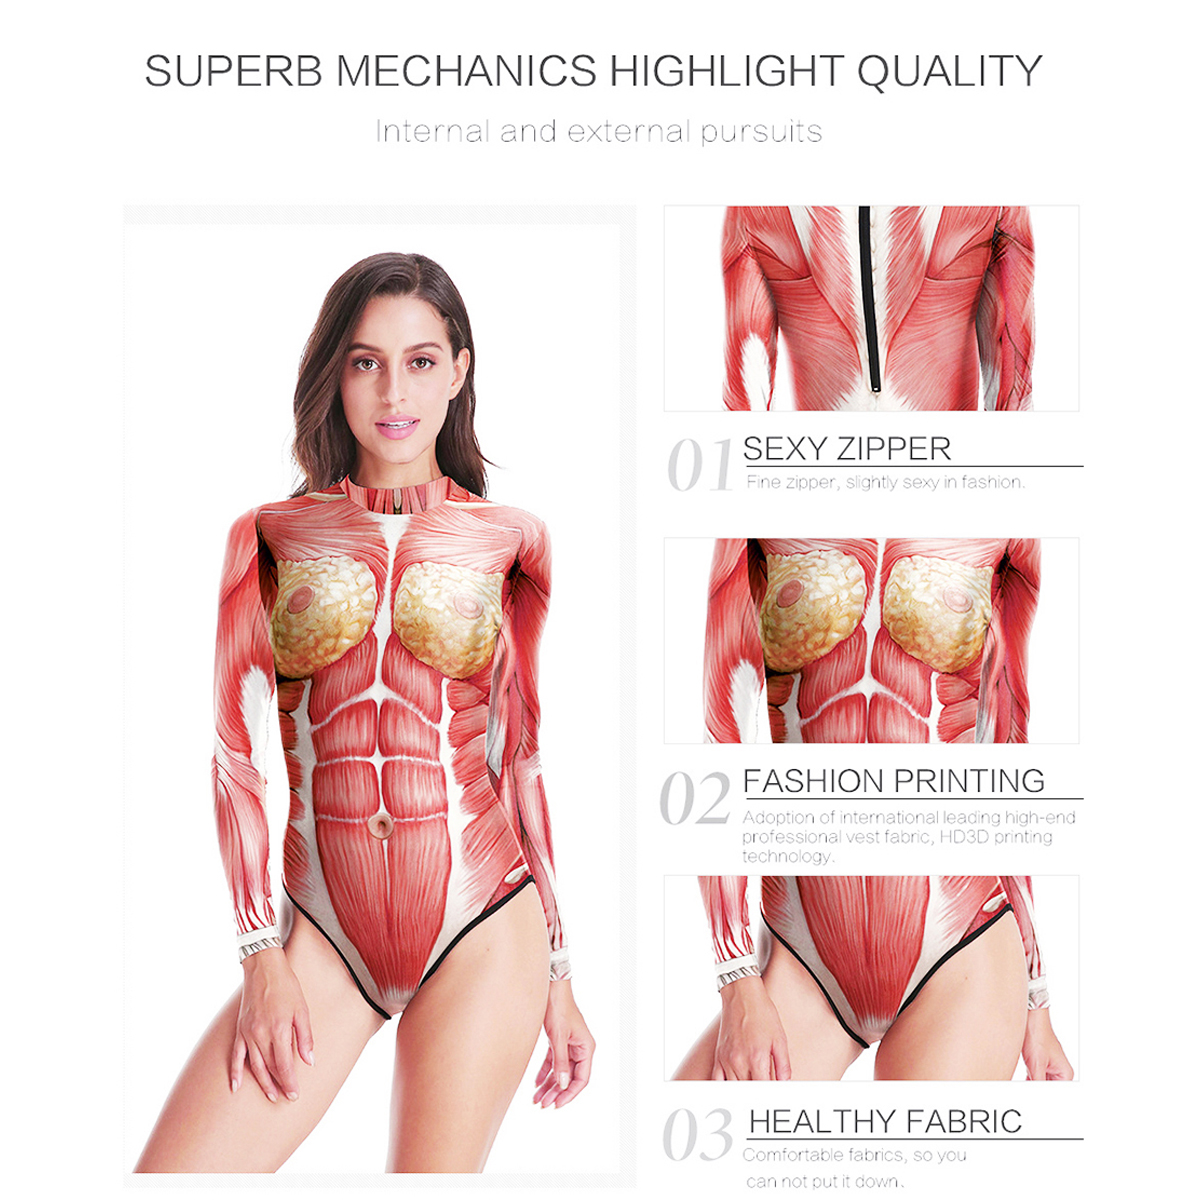 Womens-Human-Organs-Swimwear-Cosplay-Costume-Swimsuit-Bathing-Suit-Party-Clothes-1623848-1